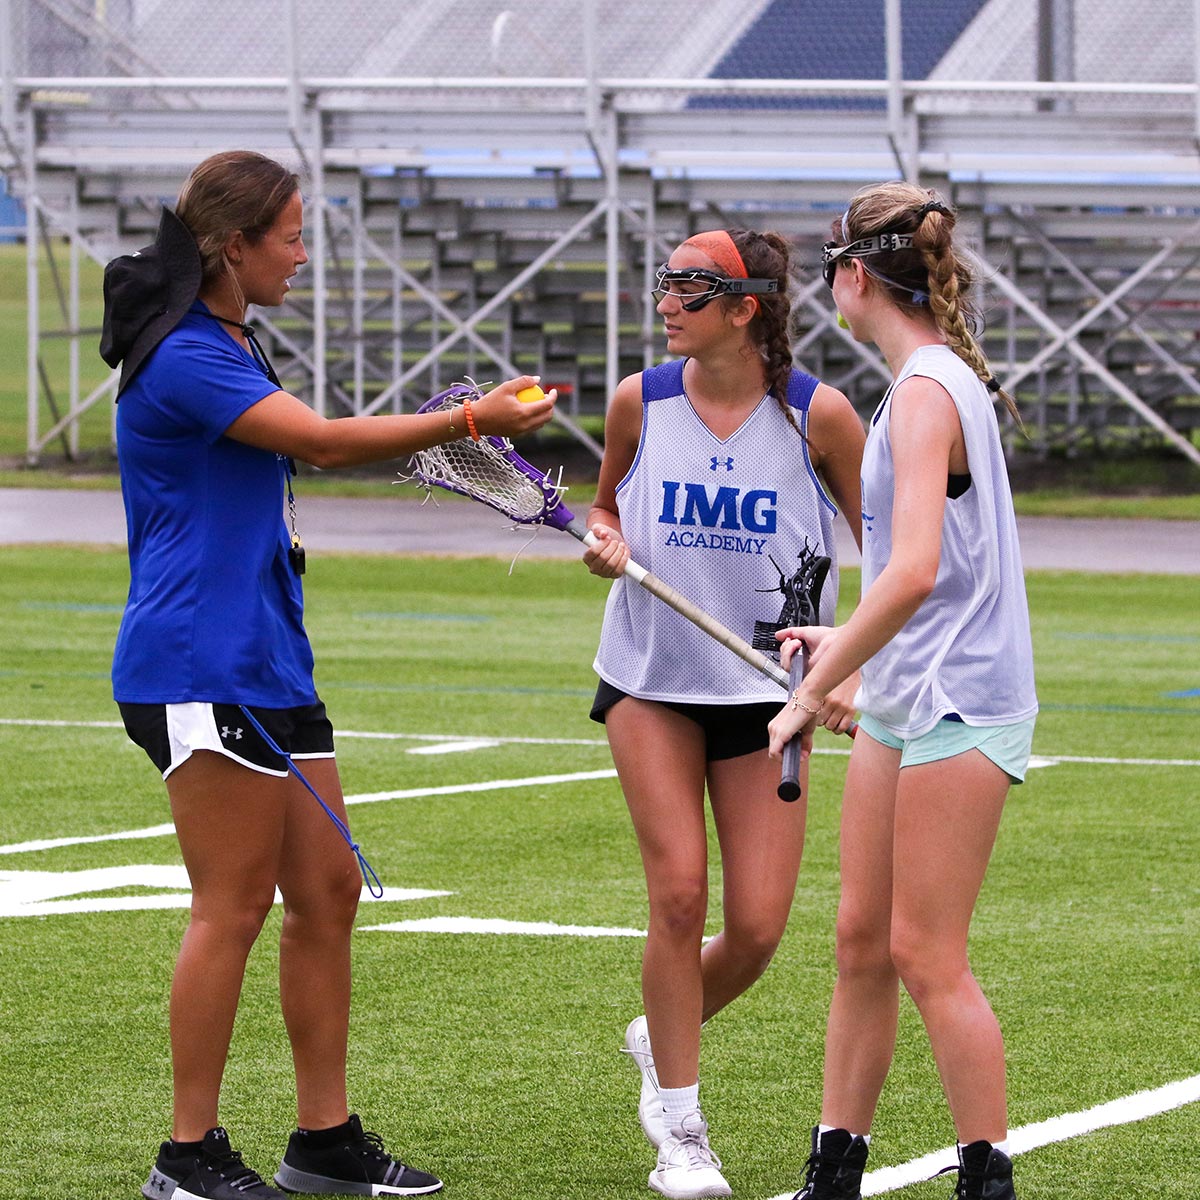 Girls Lacrosse Camp Girls Lacrosse Camps IMG Academy